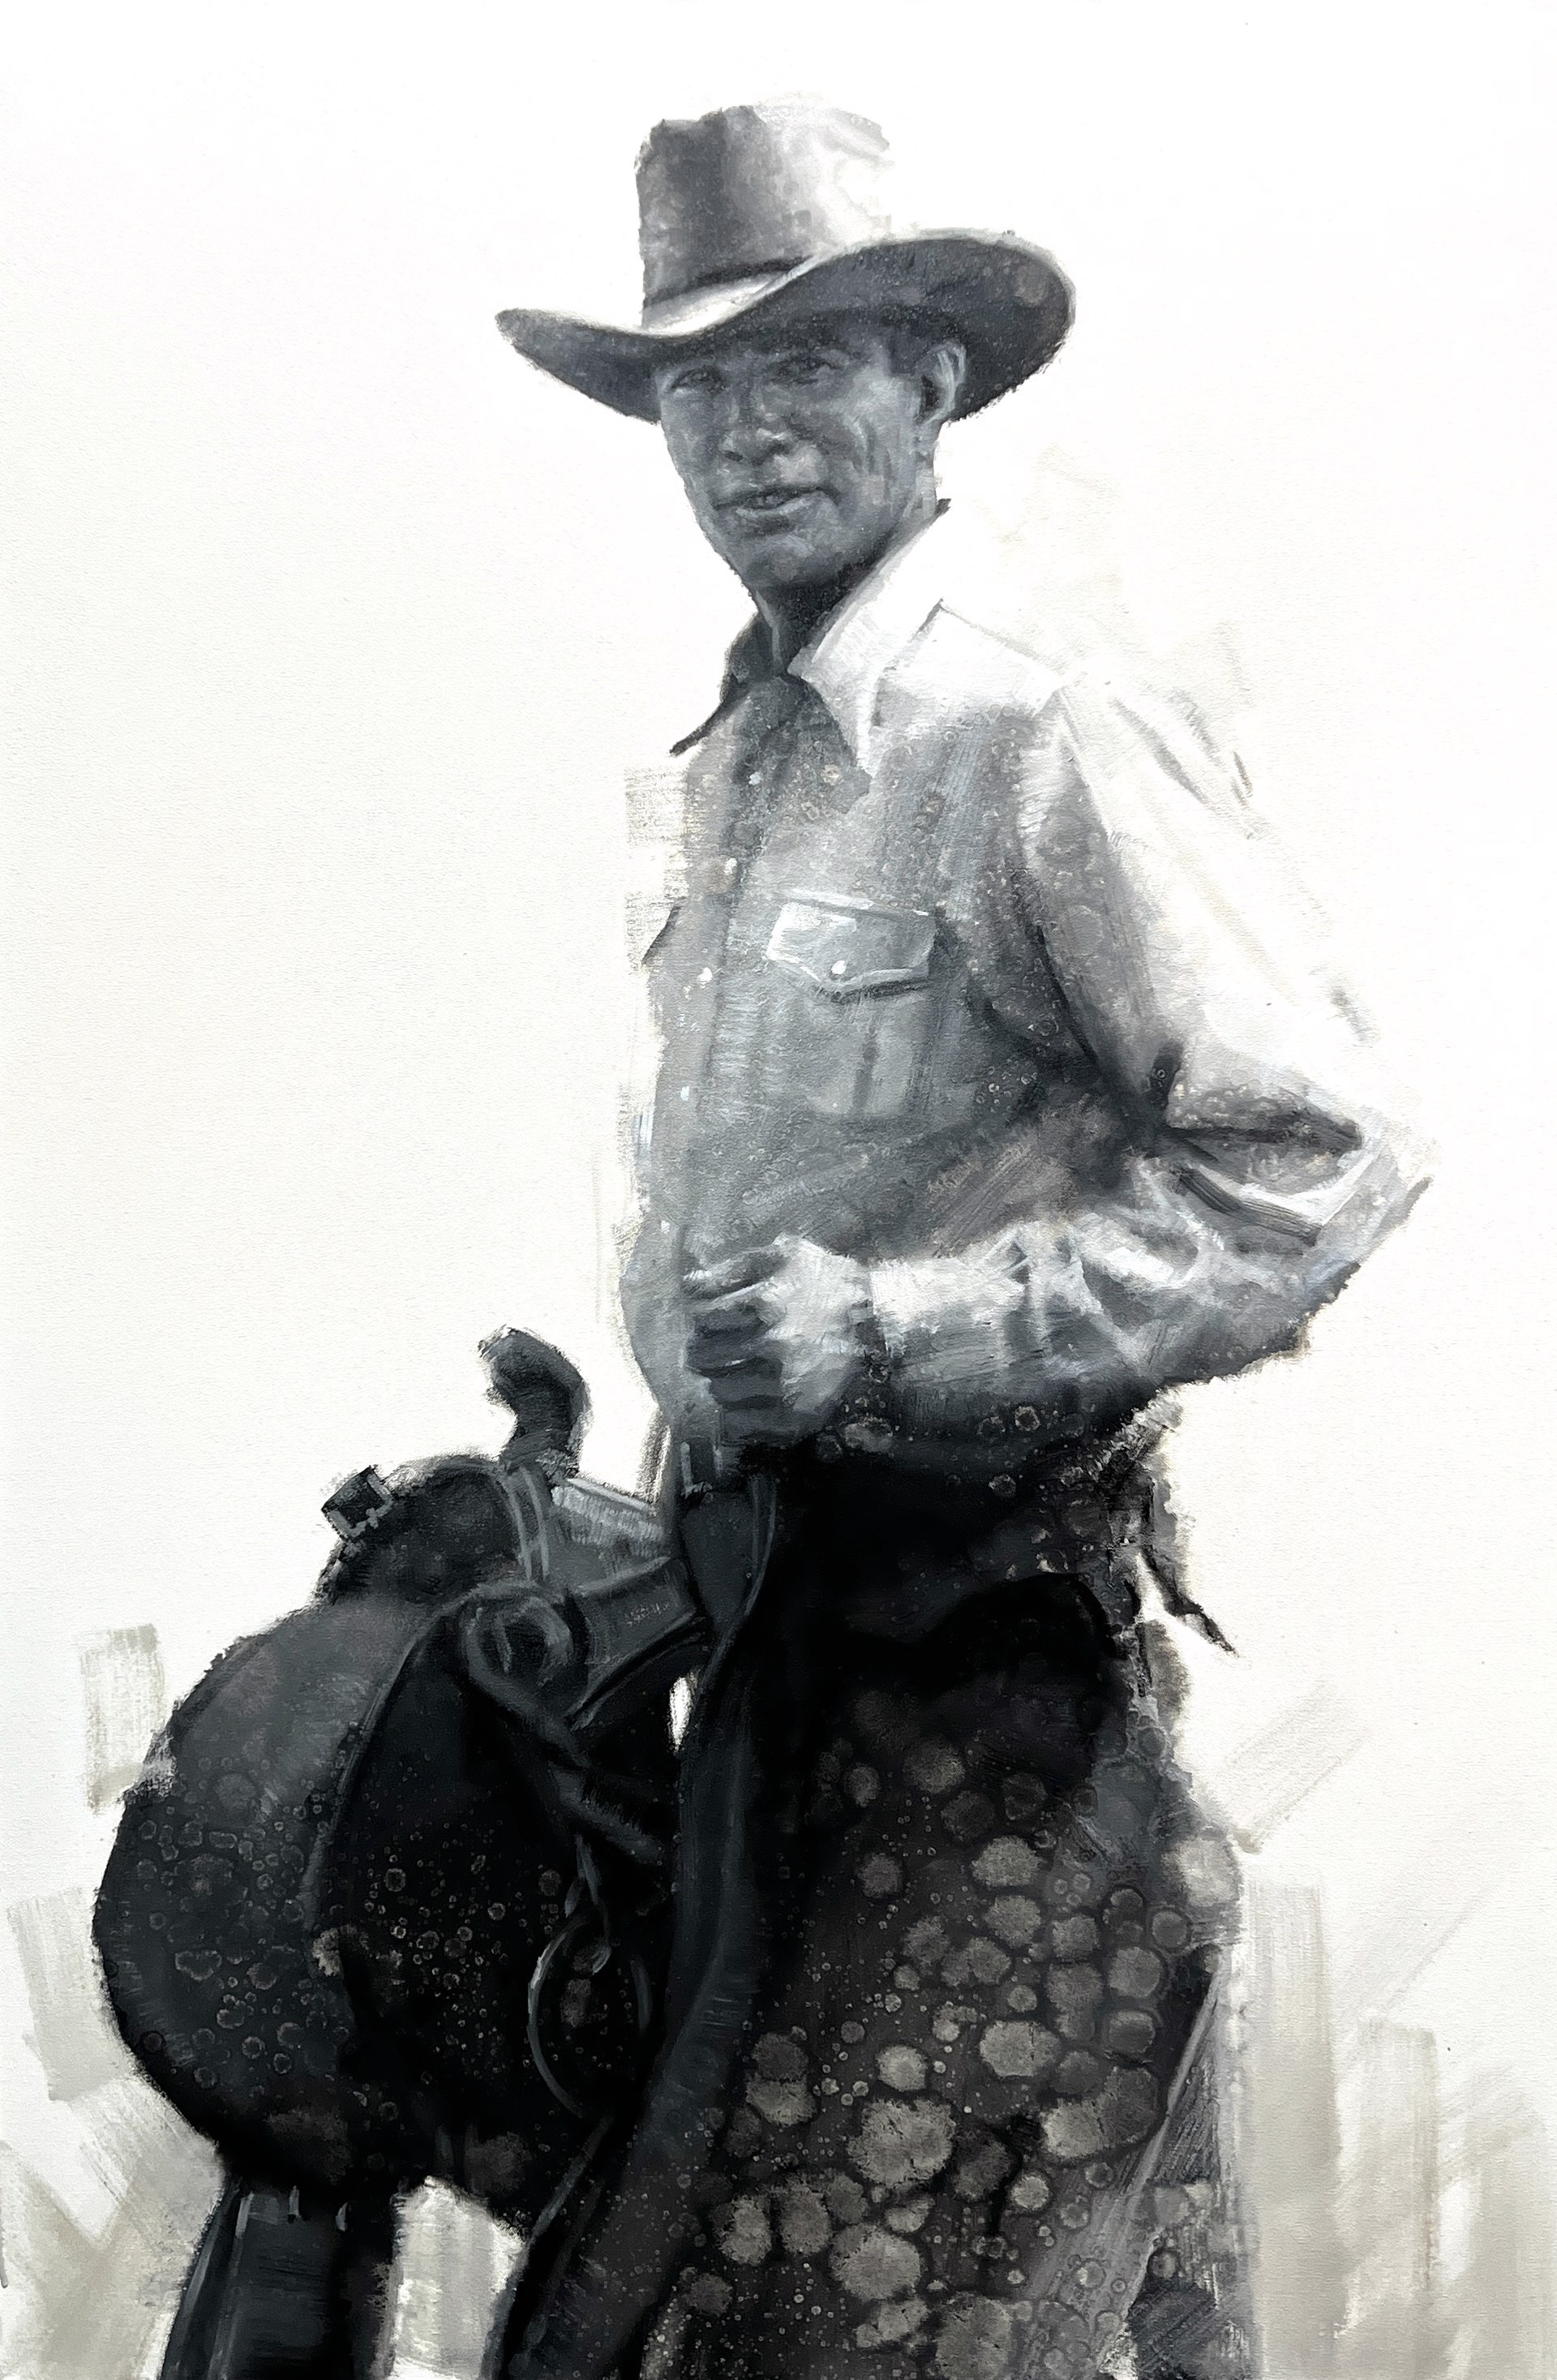 THE CHAMP: EARL THODE by David Frederick Riley